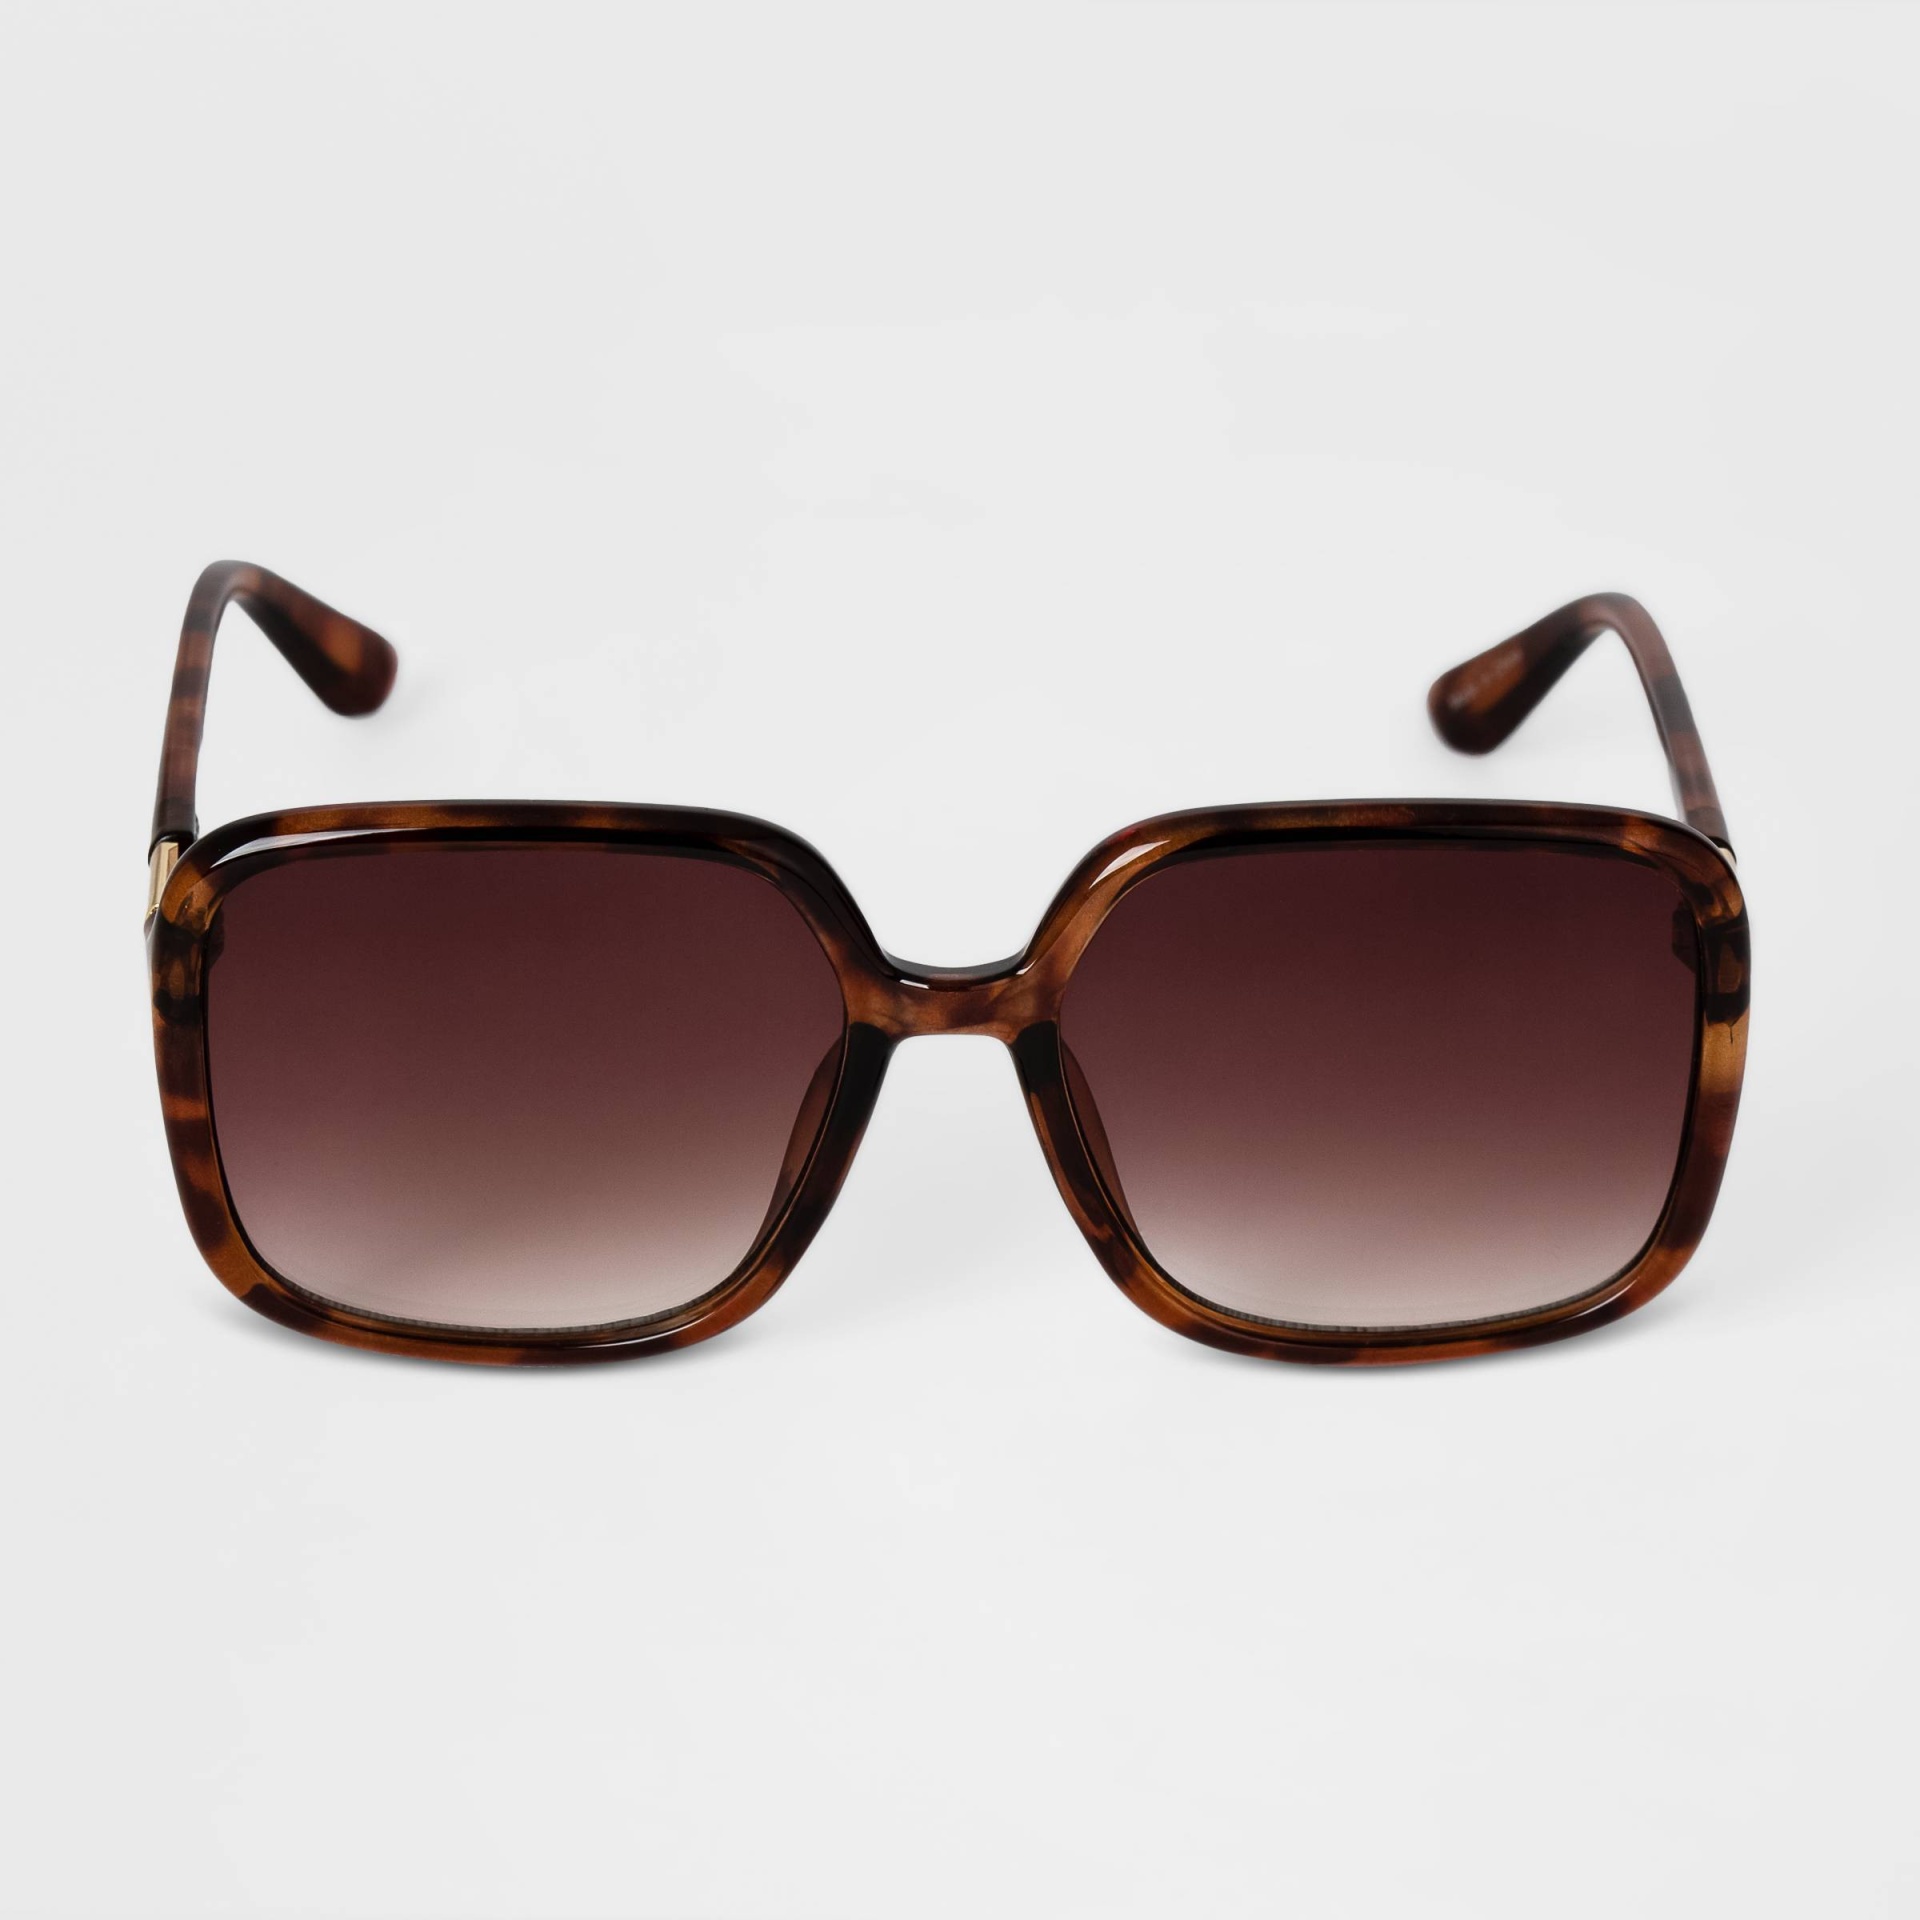 slide 1 of 2, Women's Tortoise Shell Oversized Square Sunglasses - A New Day Brown, 1 ct